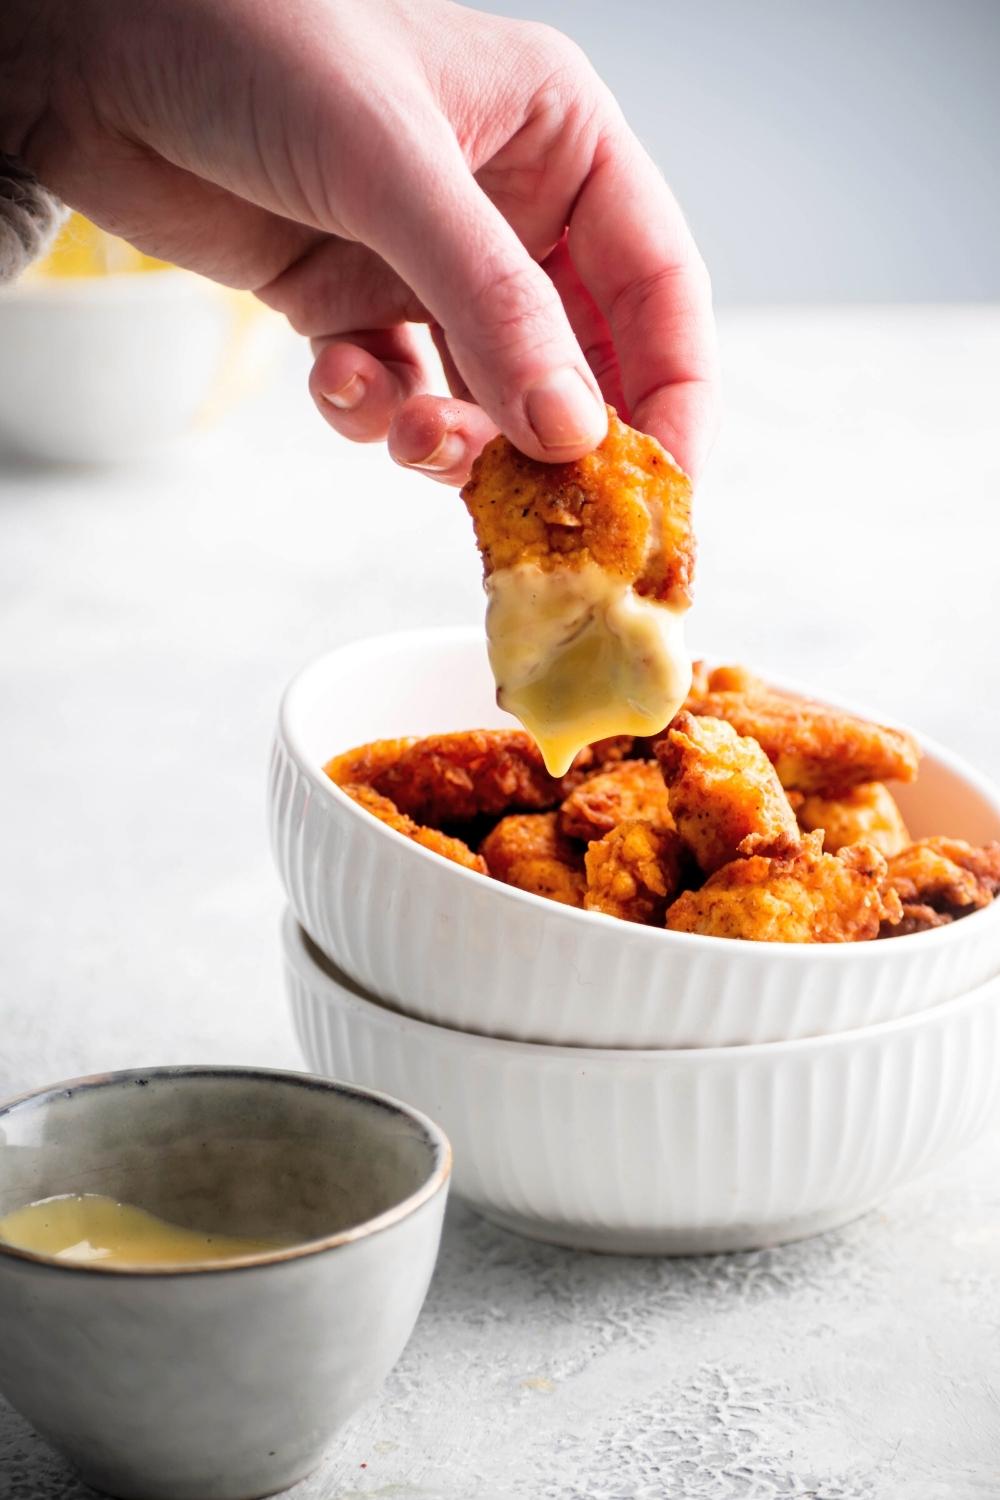 A hand holding a Chick-fil-A nugget with Chick-fil-A sauce on it over a white bowl that is filled with the Chick-fil-A nuggets.